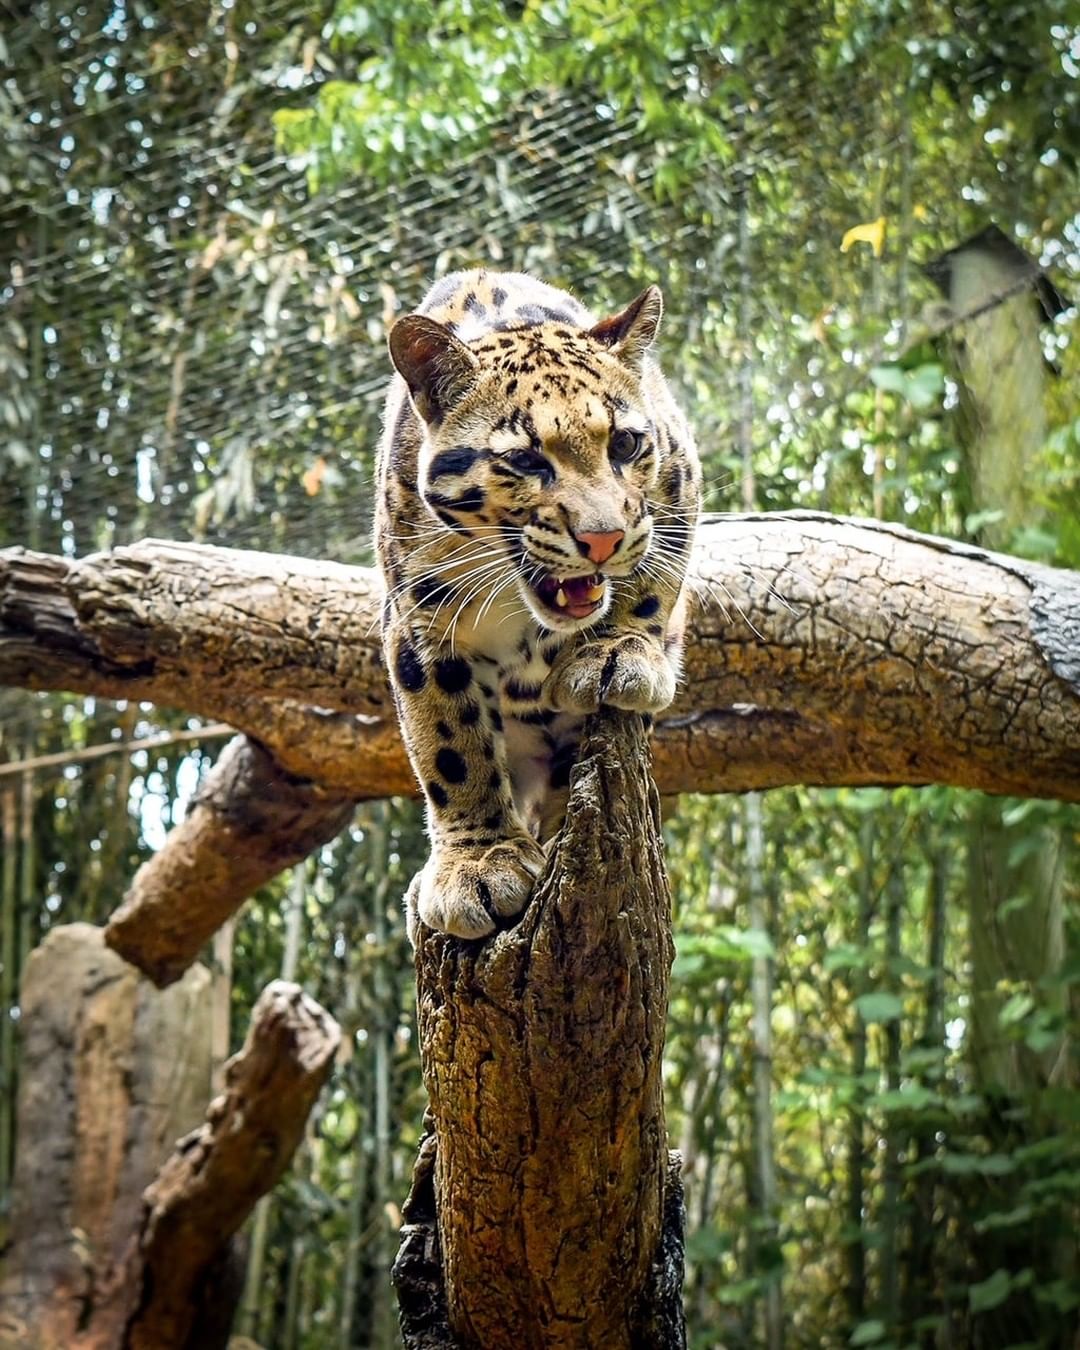 Leopard on a Branch at the Nashville Zoo. Photo by Instagram user @nashvillezoo